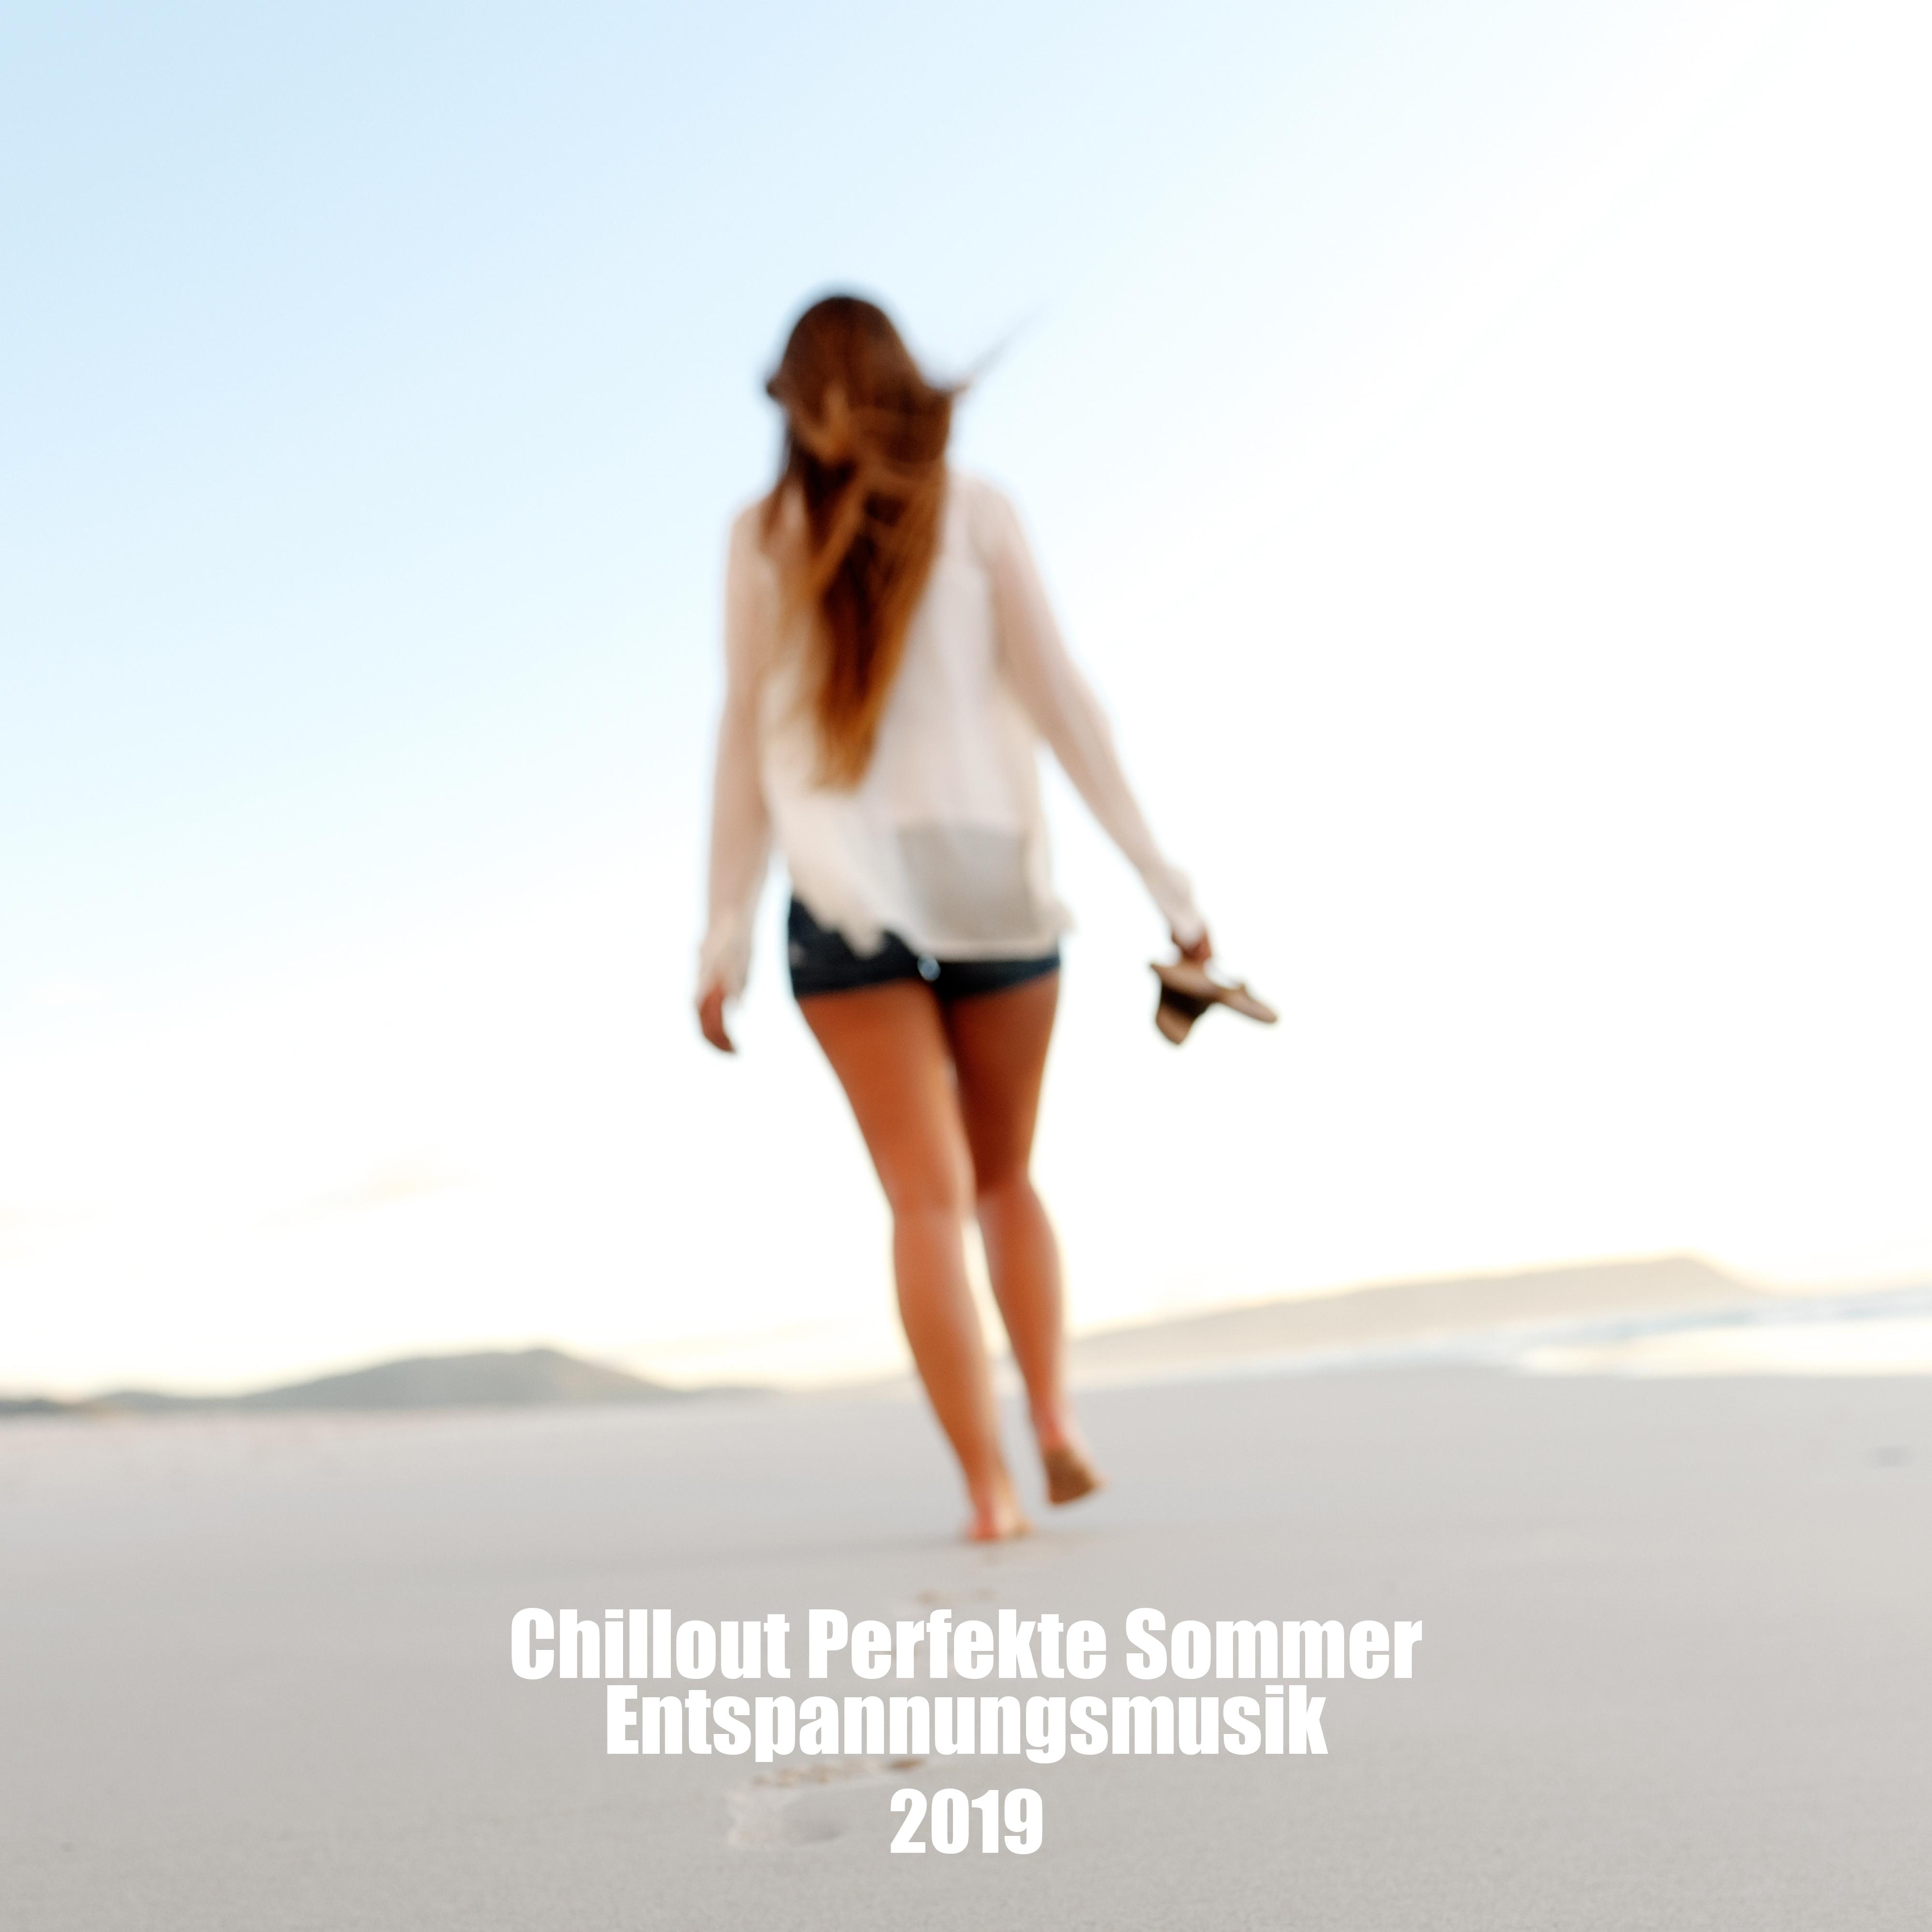 Chillout Perfekte Sommer-Entspannungsmusik 2019